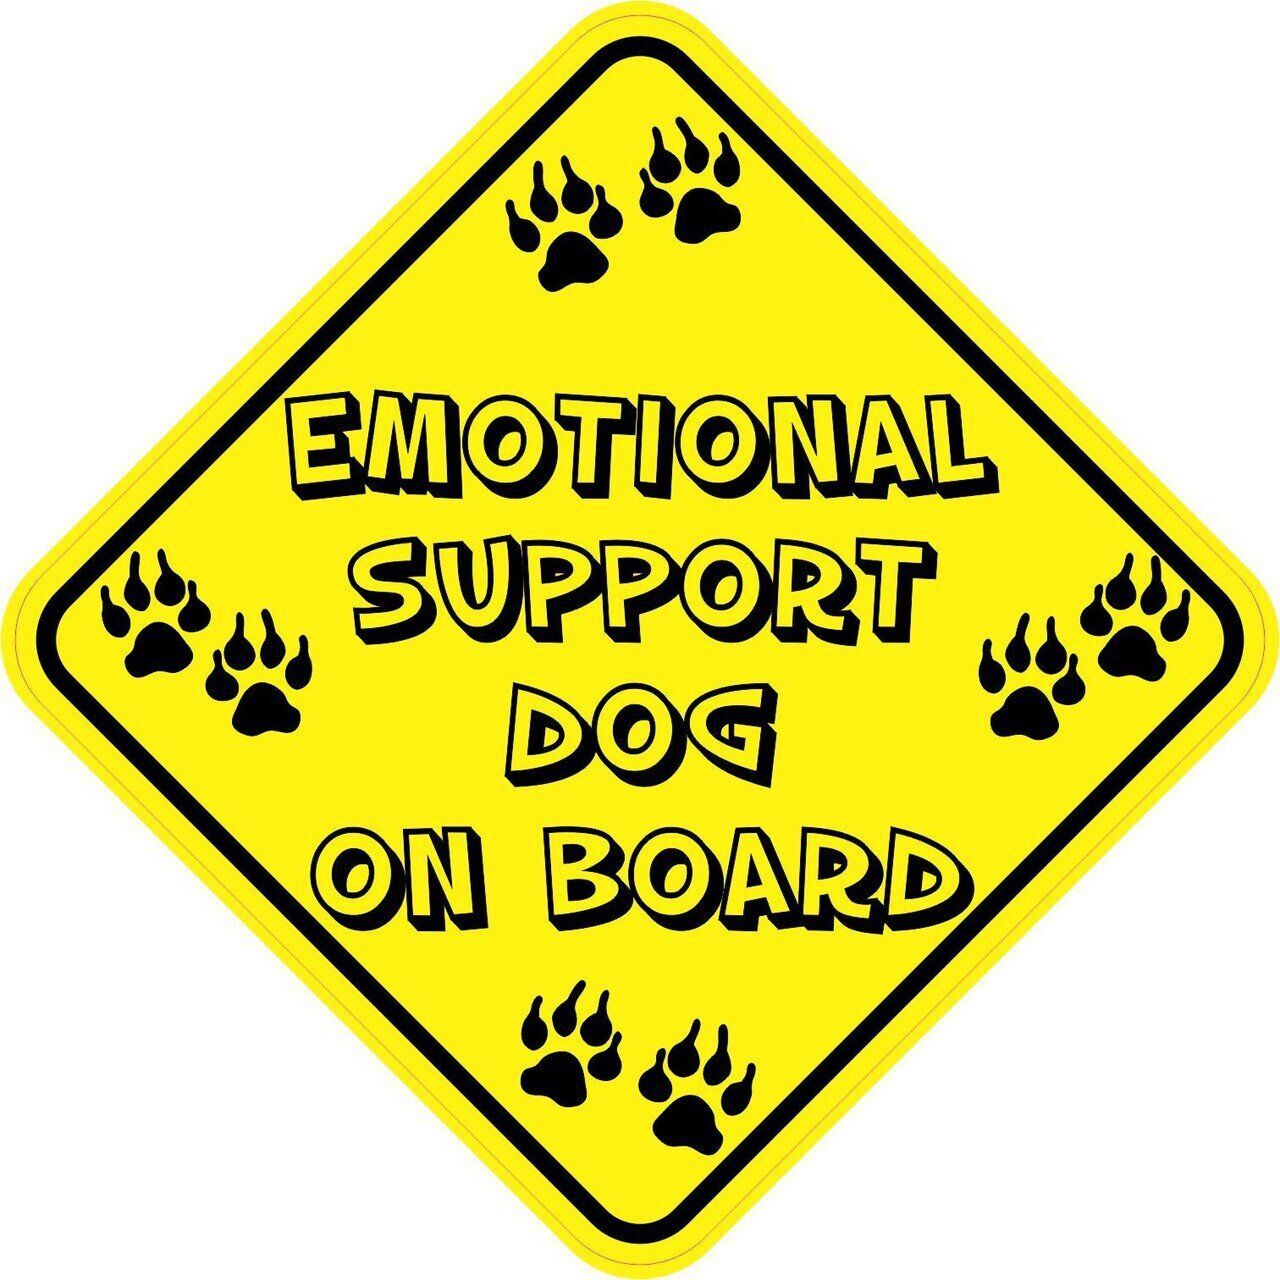 5in x 5in Emotional Support Dog On Board Sticker Car Truck Vehicle Bumper Decal